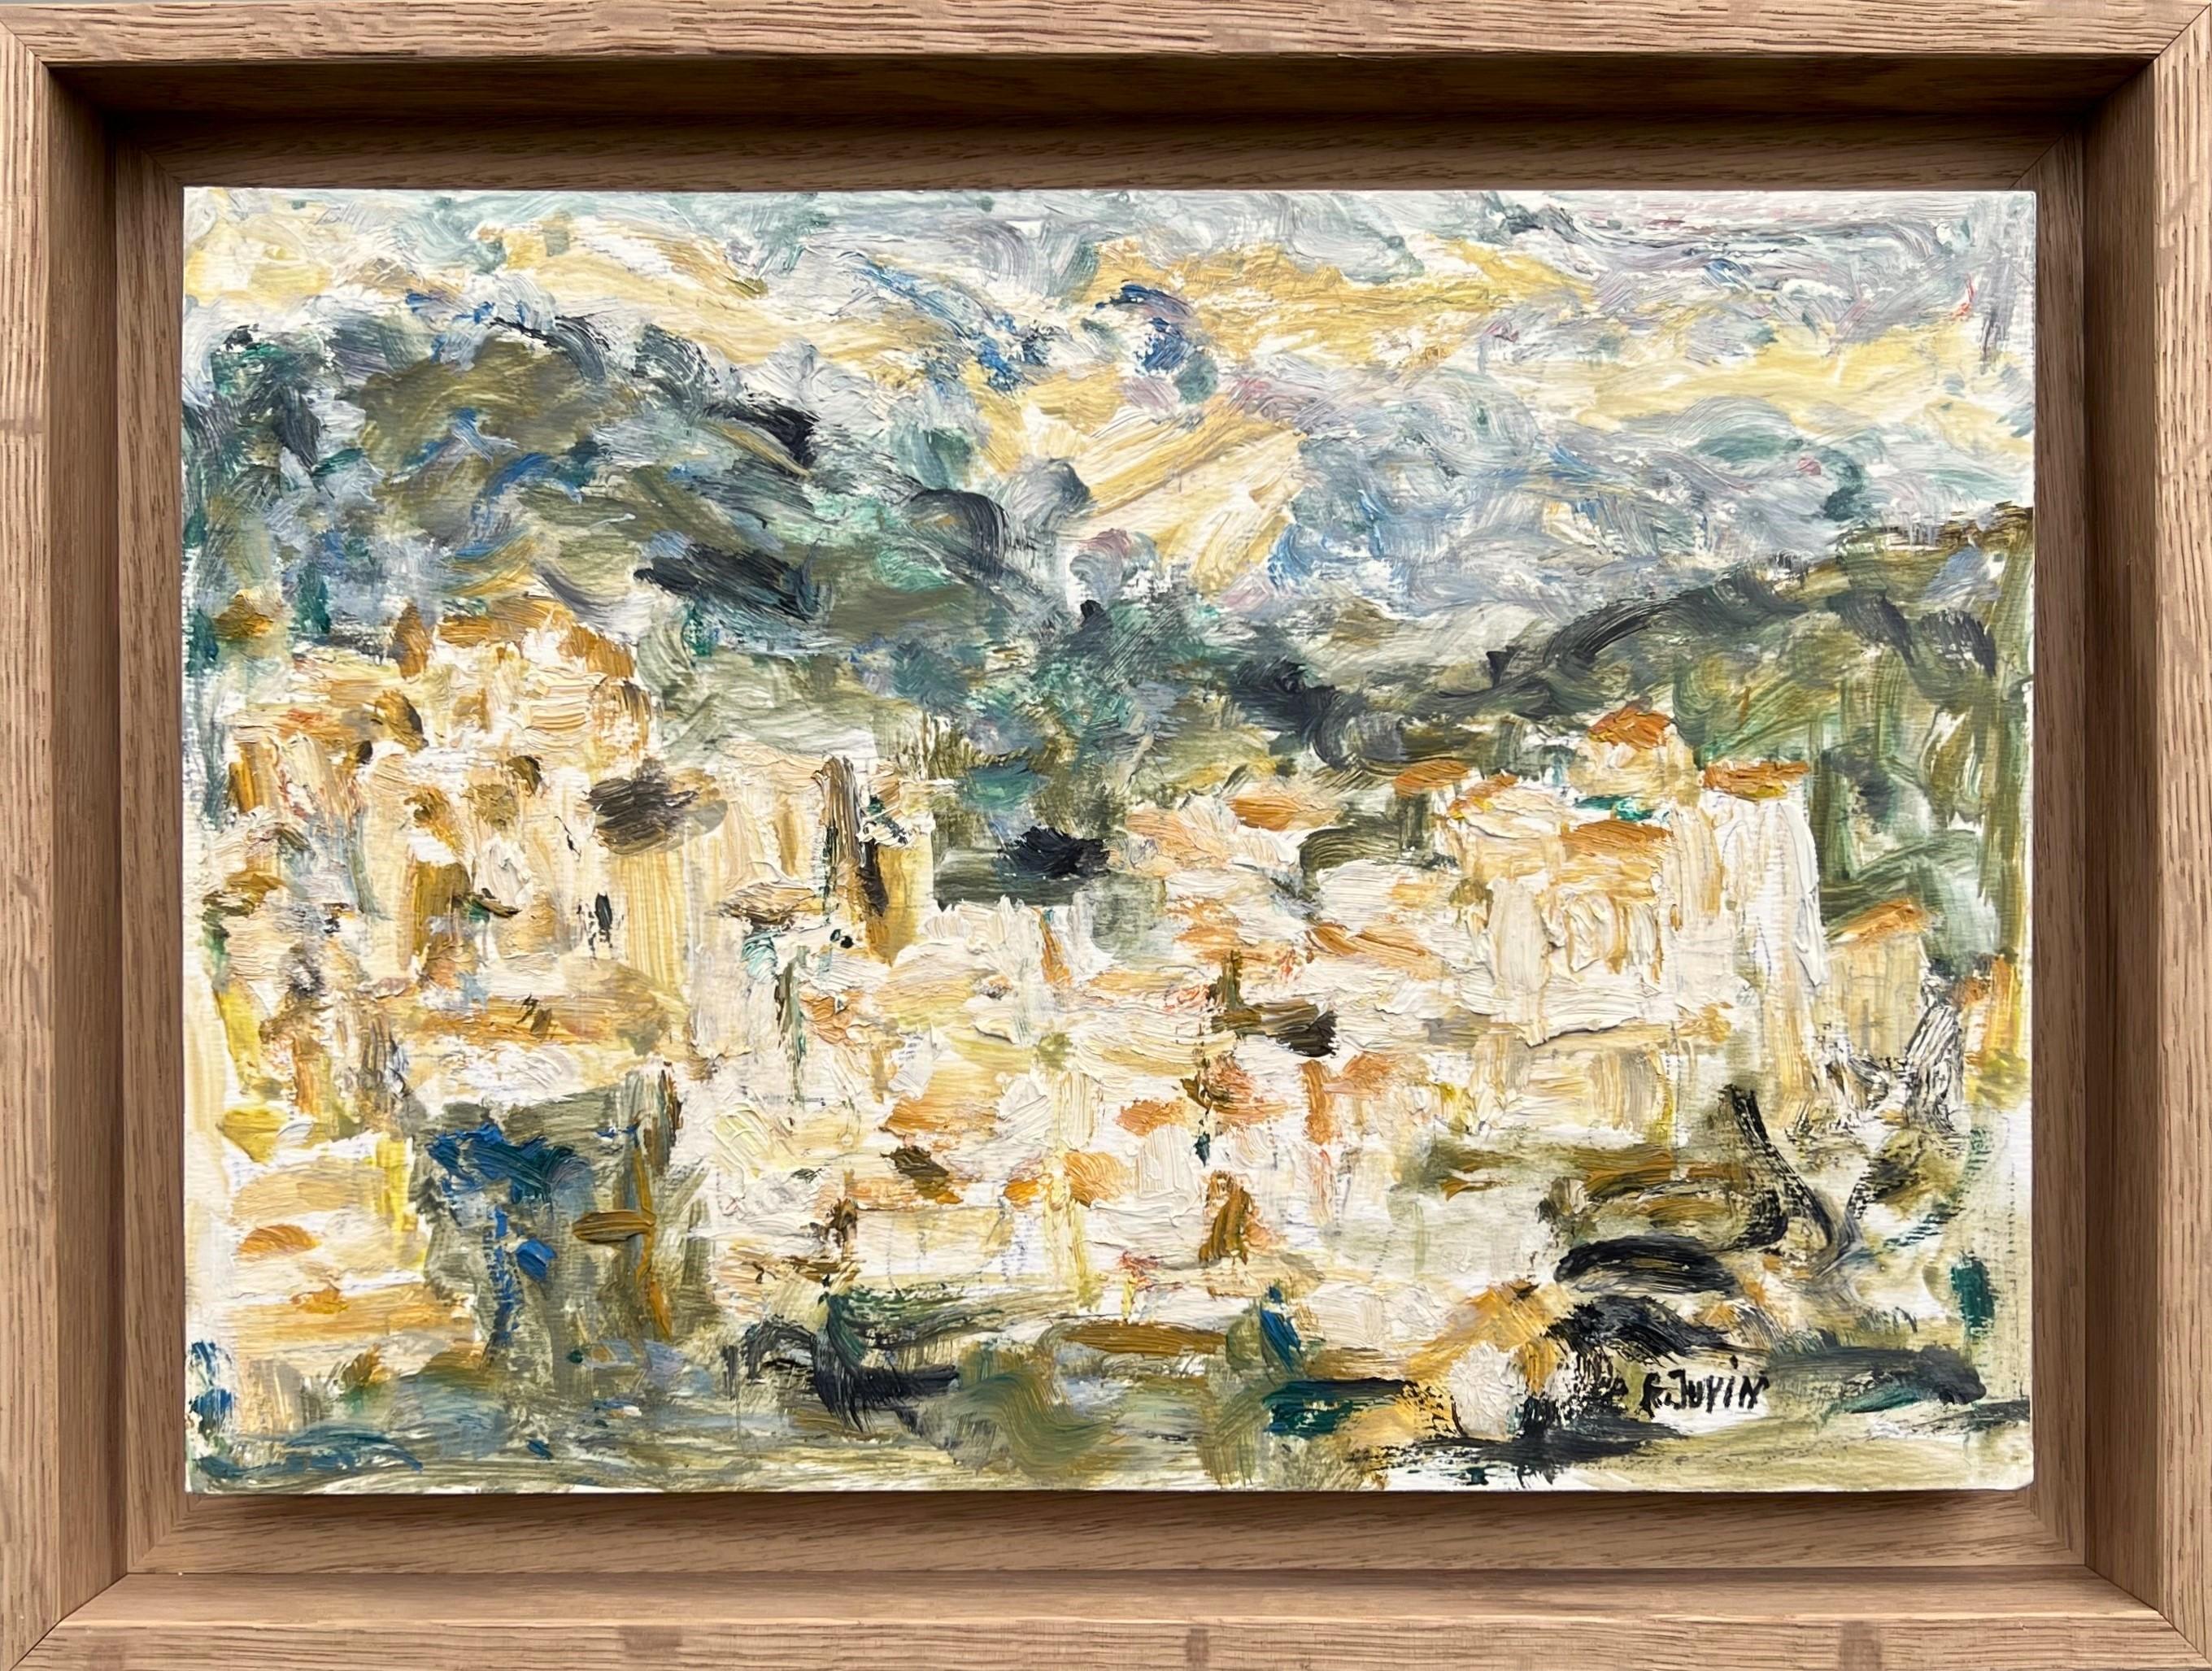 Landscape, Village in French Provence, oil painting by Françoise Juvin